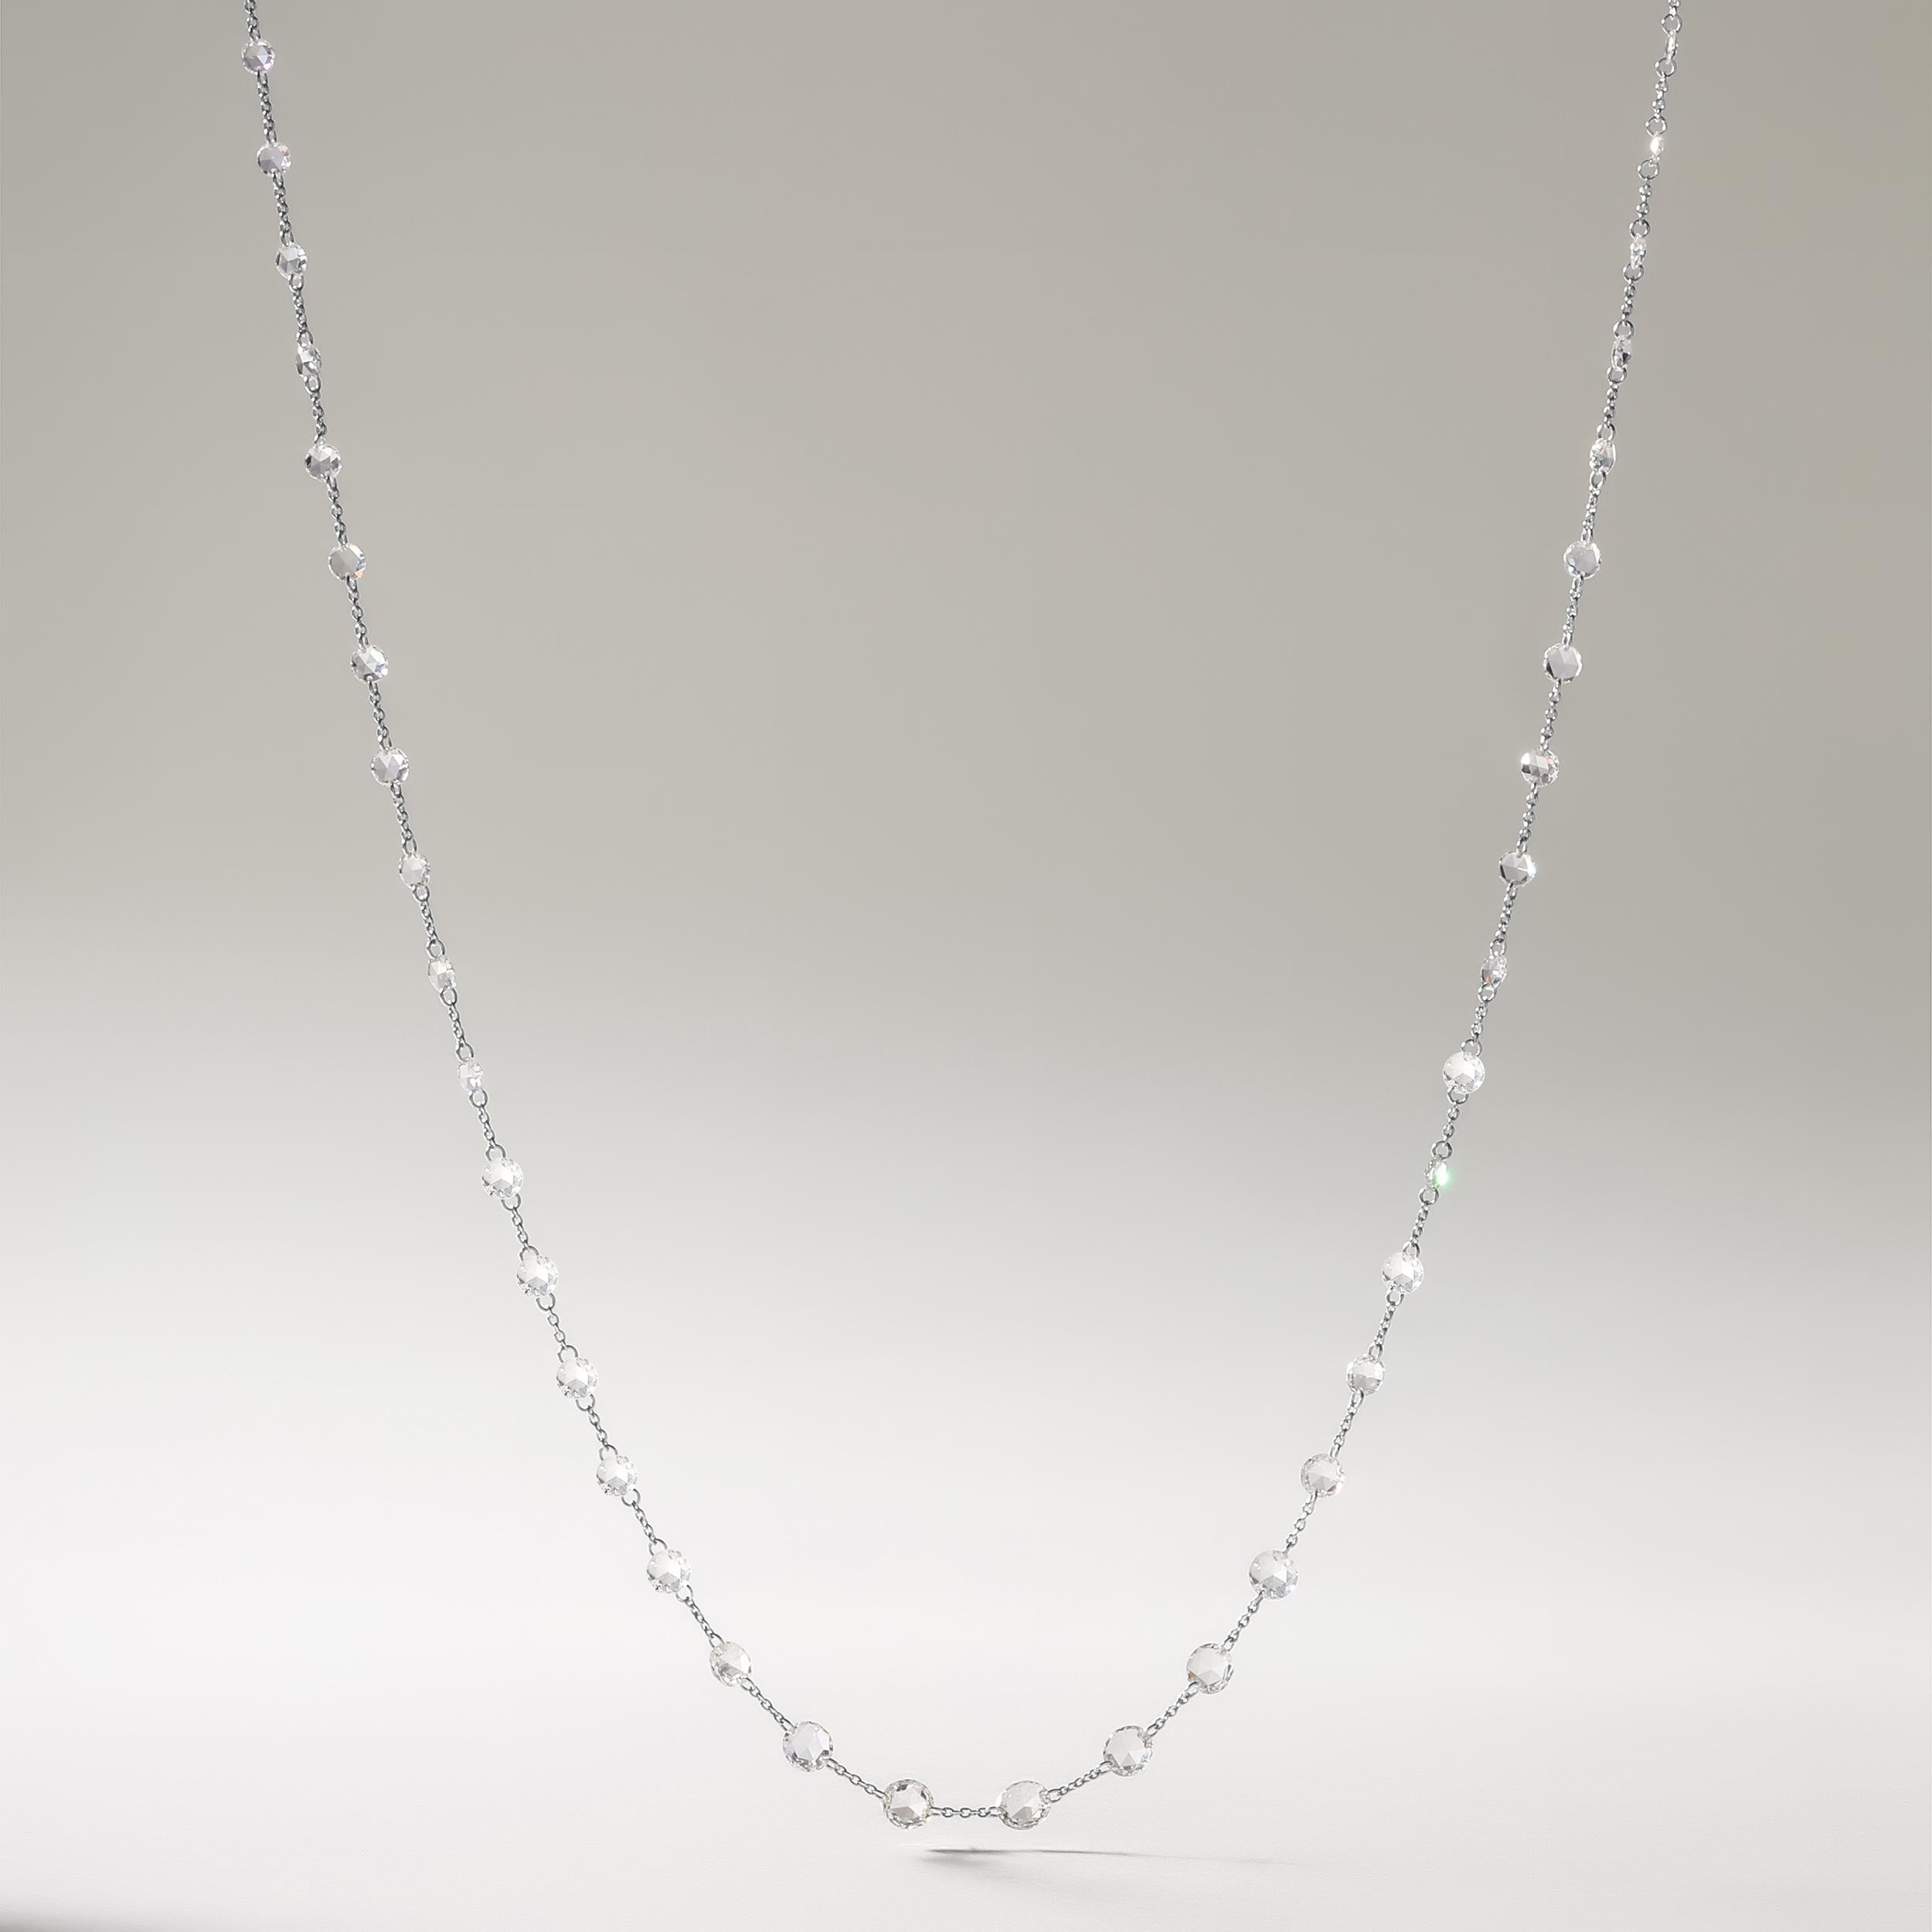 Crafted in 2.2 grams of 18K White Gold, the necklace contains 55 stones of Pear Shaped Rose Cut Natural Natural Diamonds with a total of 3.7 carat in E-F color and VVS-VS clarity. The necklace length is 18 inches.

CONTEMPORARY AND TIMELESS ESSENCE: